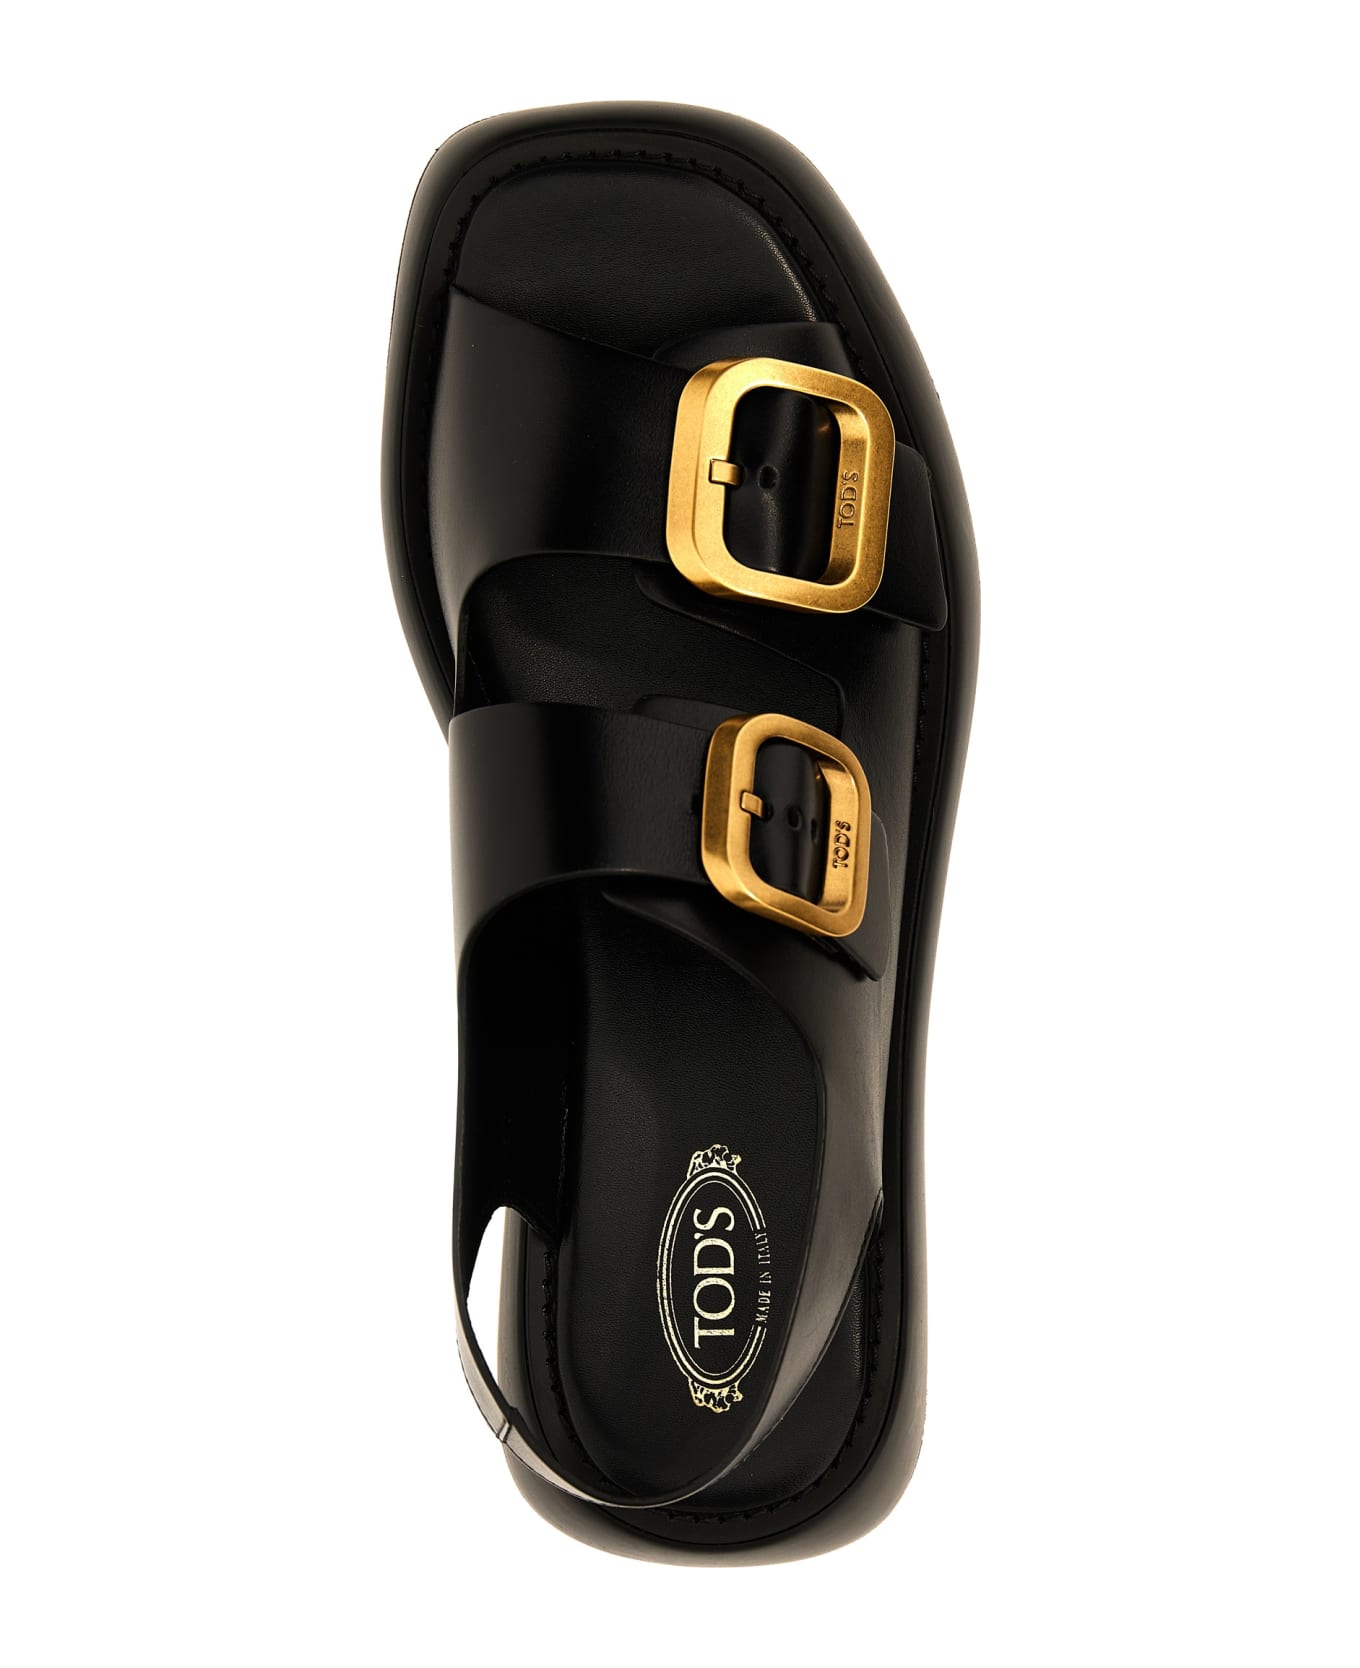 Tod's Buckle Sandals